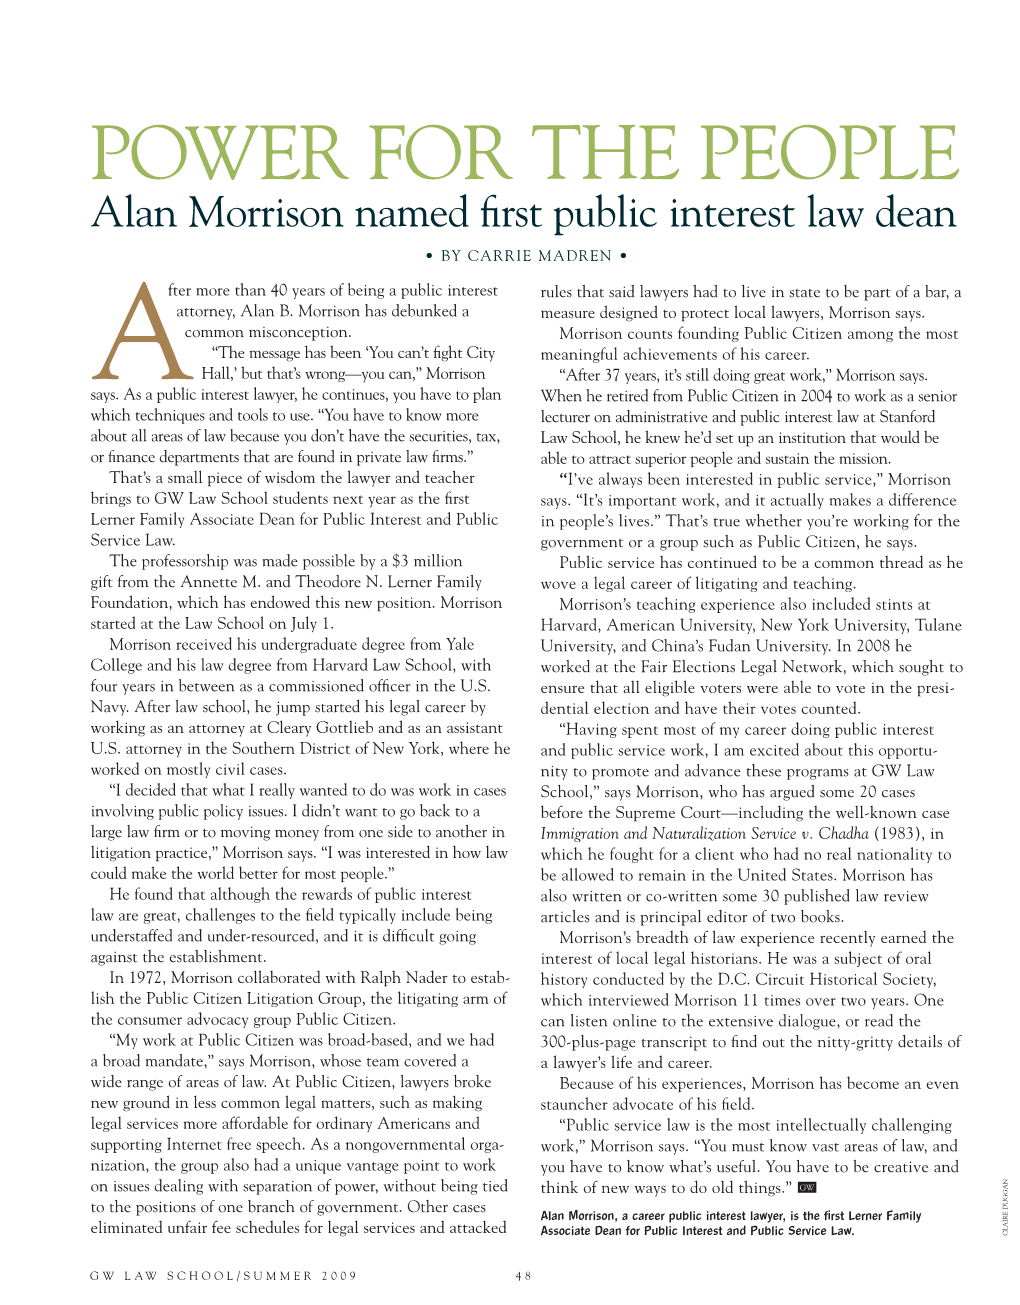 POWER for the PEOPLE Alan Morrison Named ﬁ Rst Public Interest Law Dean • by CARRIE MADREN •